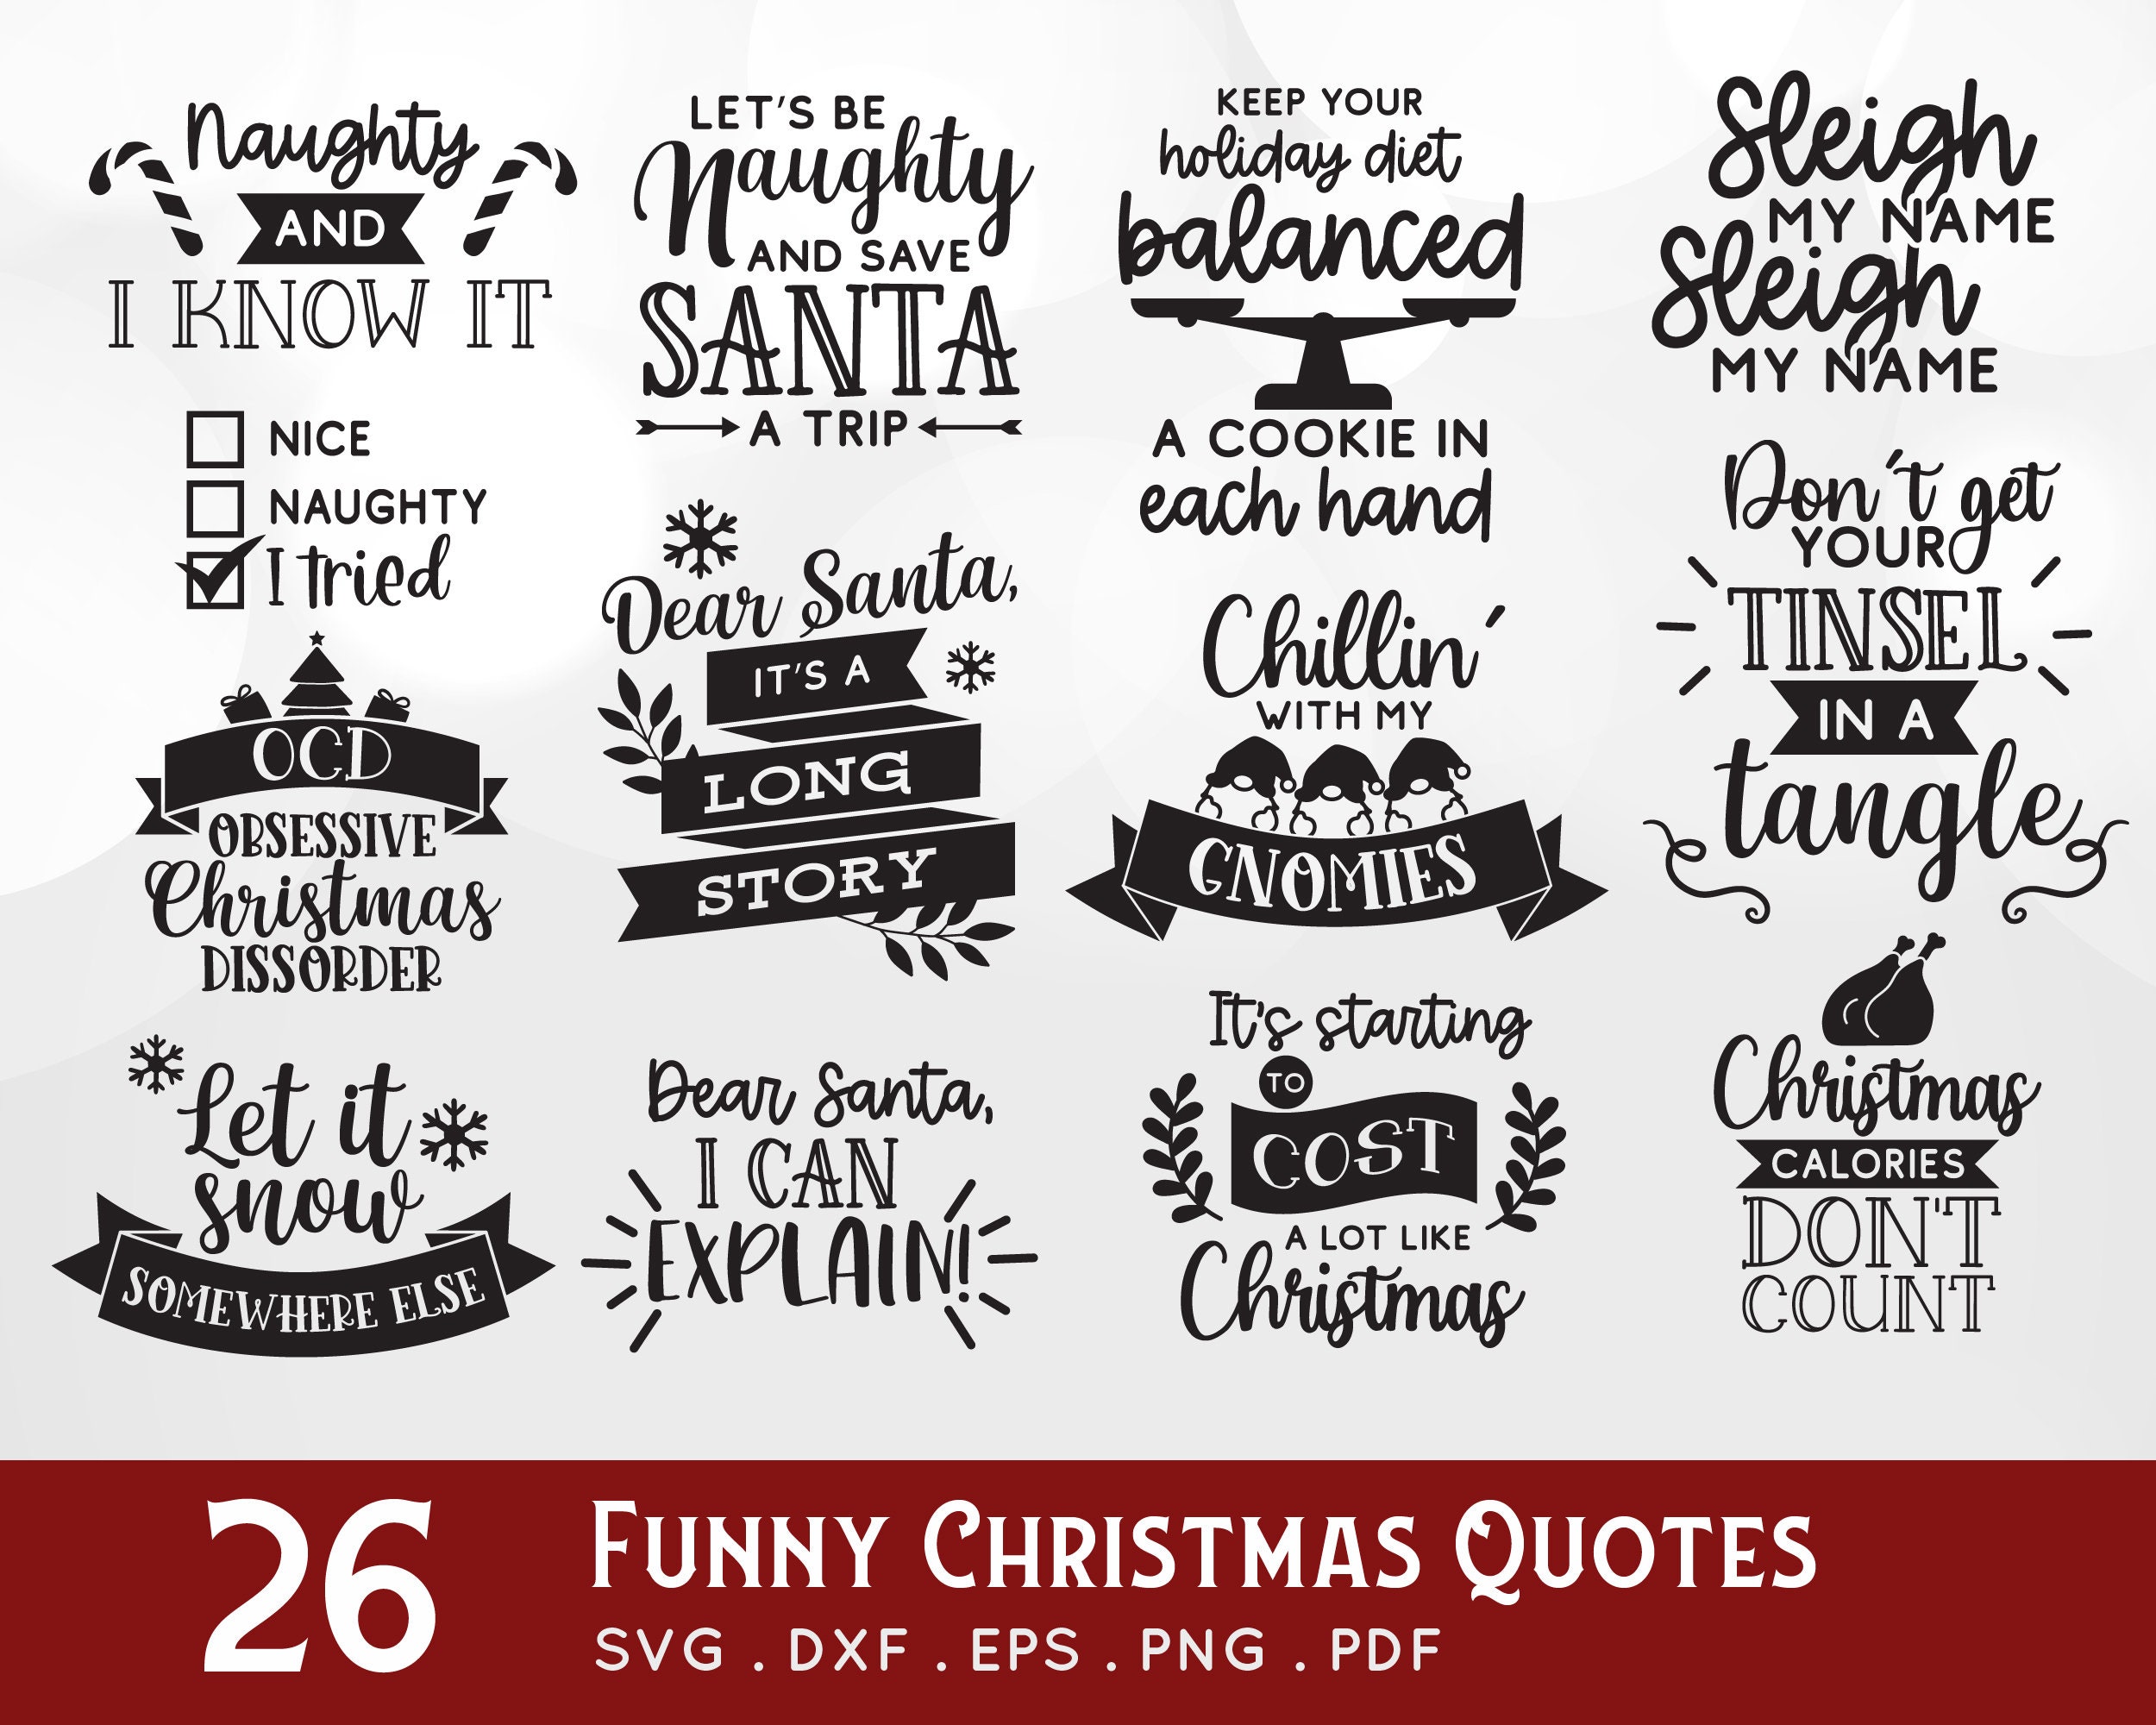 Funny Christmas Quotes For Cards